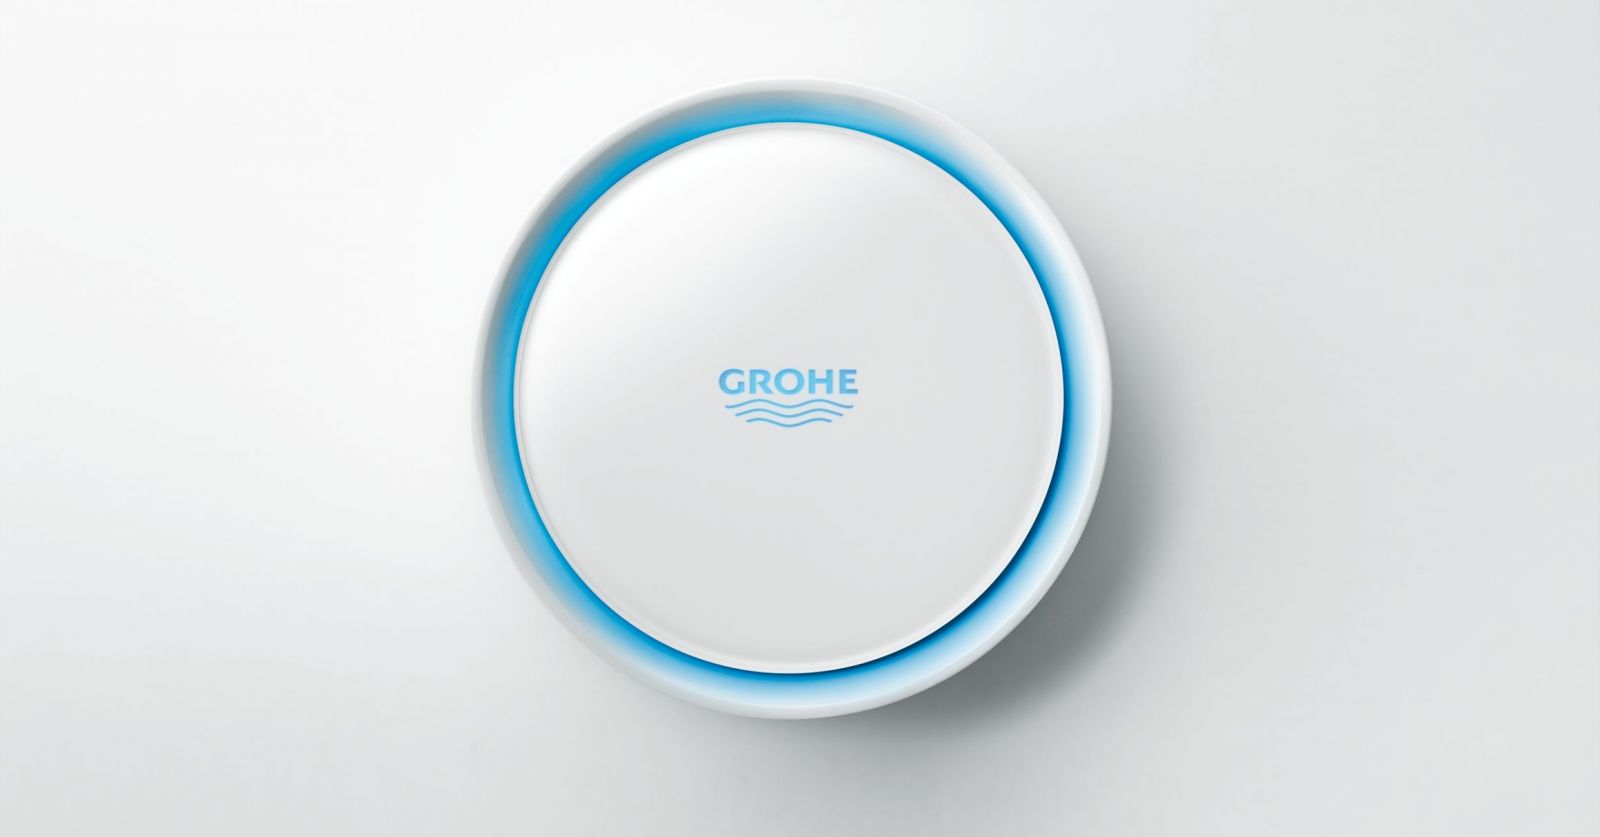 01-Sense and Sense Guard smart water control from Grohe gives property peace of mind